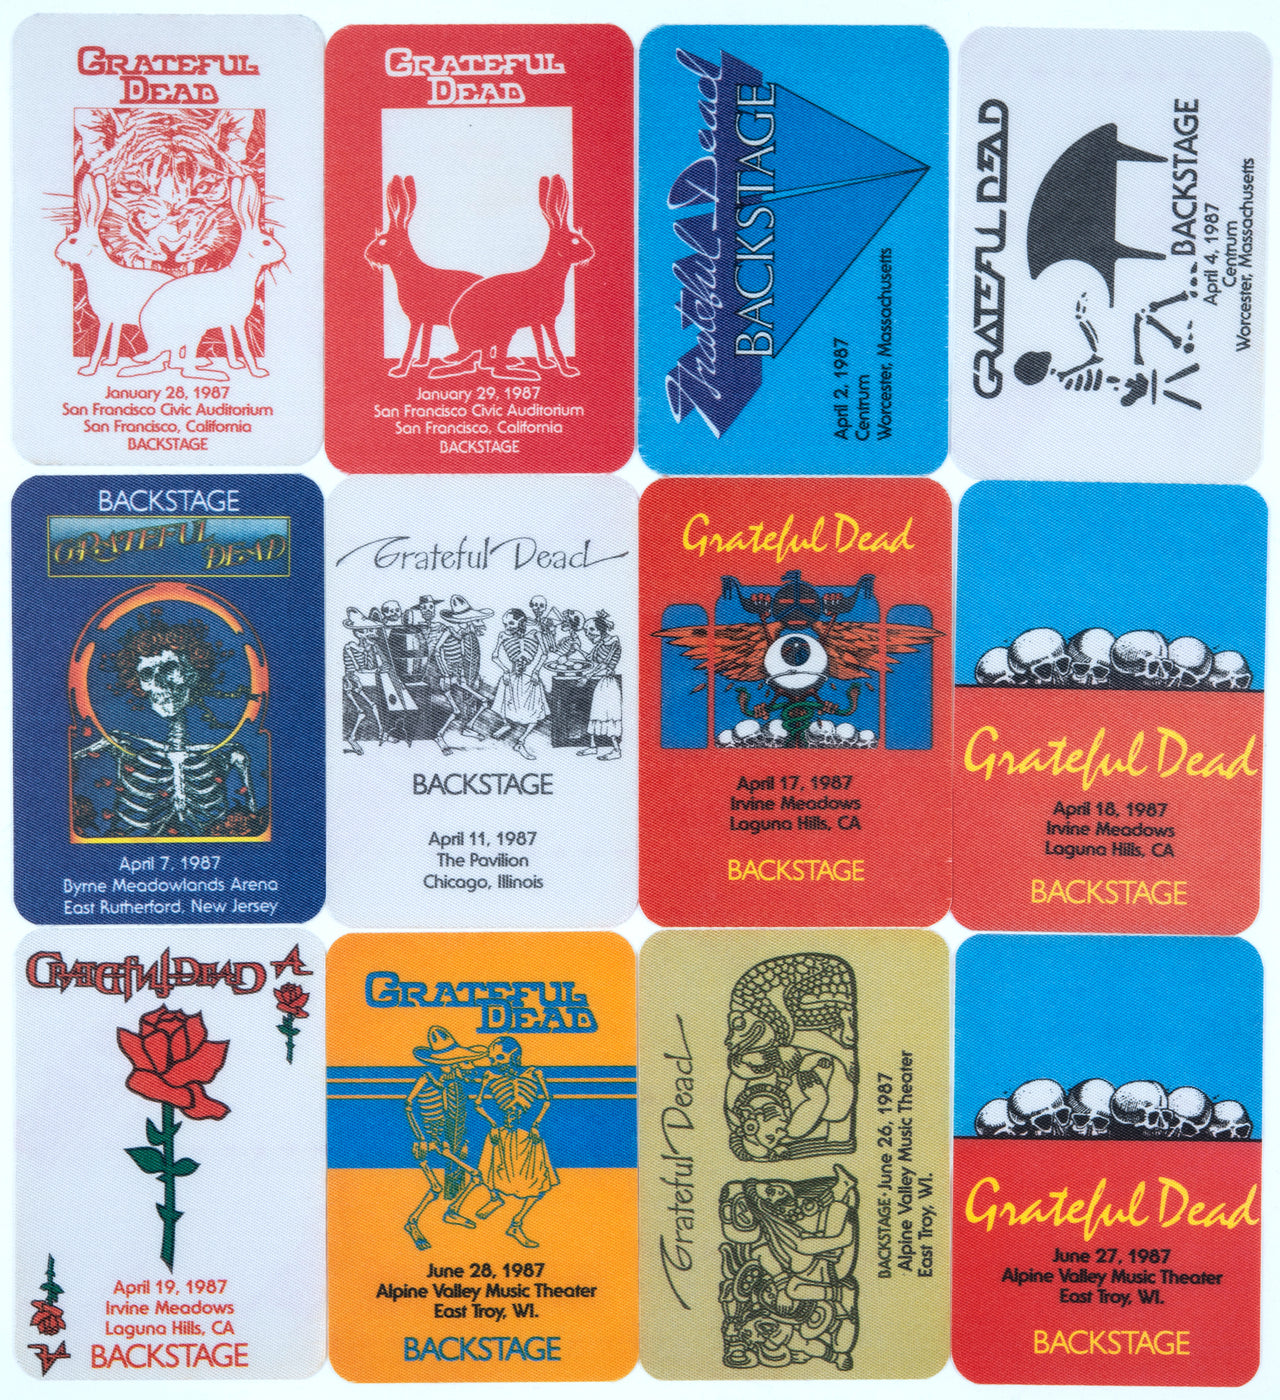 Grateful Dead Backstage Passes (1/28/1987 - 6/27/1987) from Dan Healy